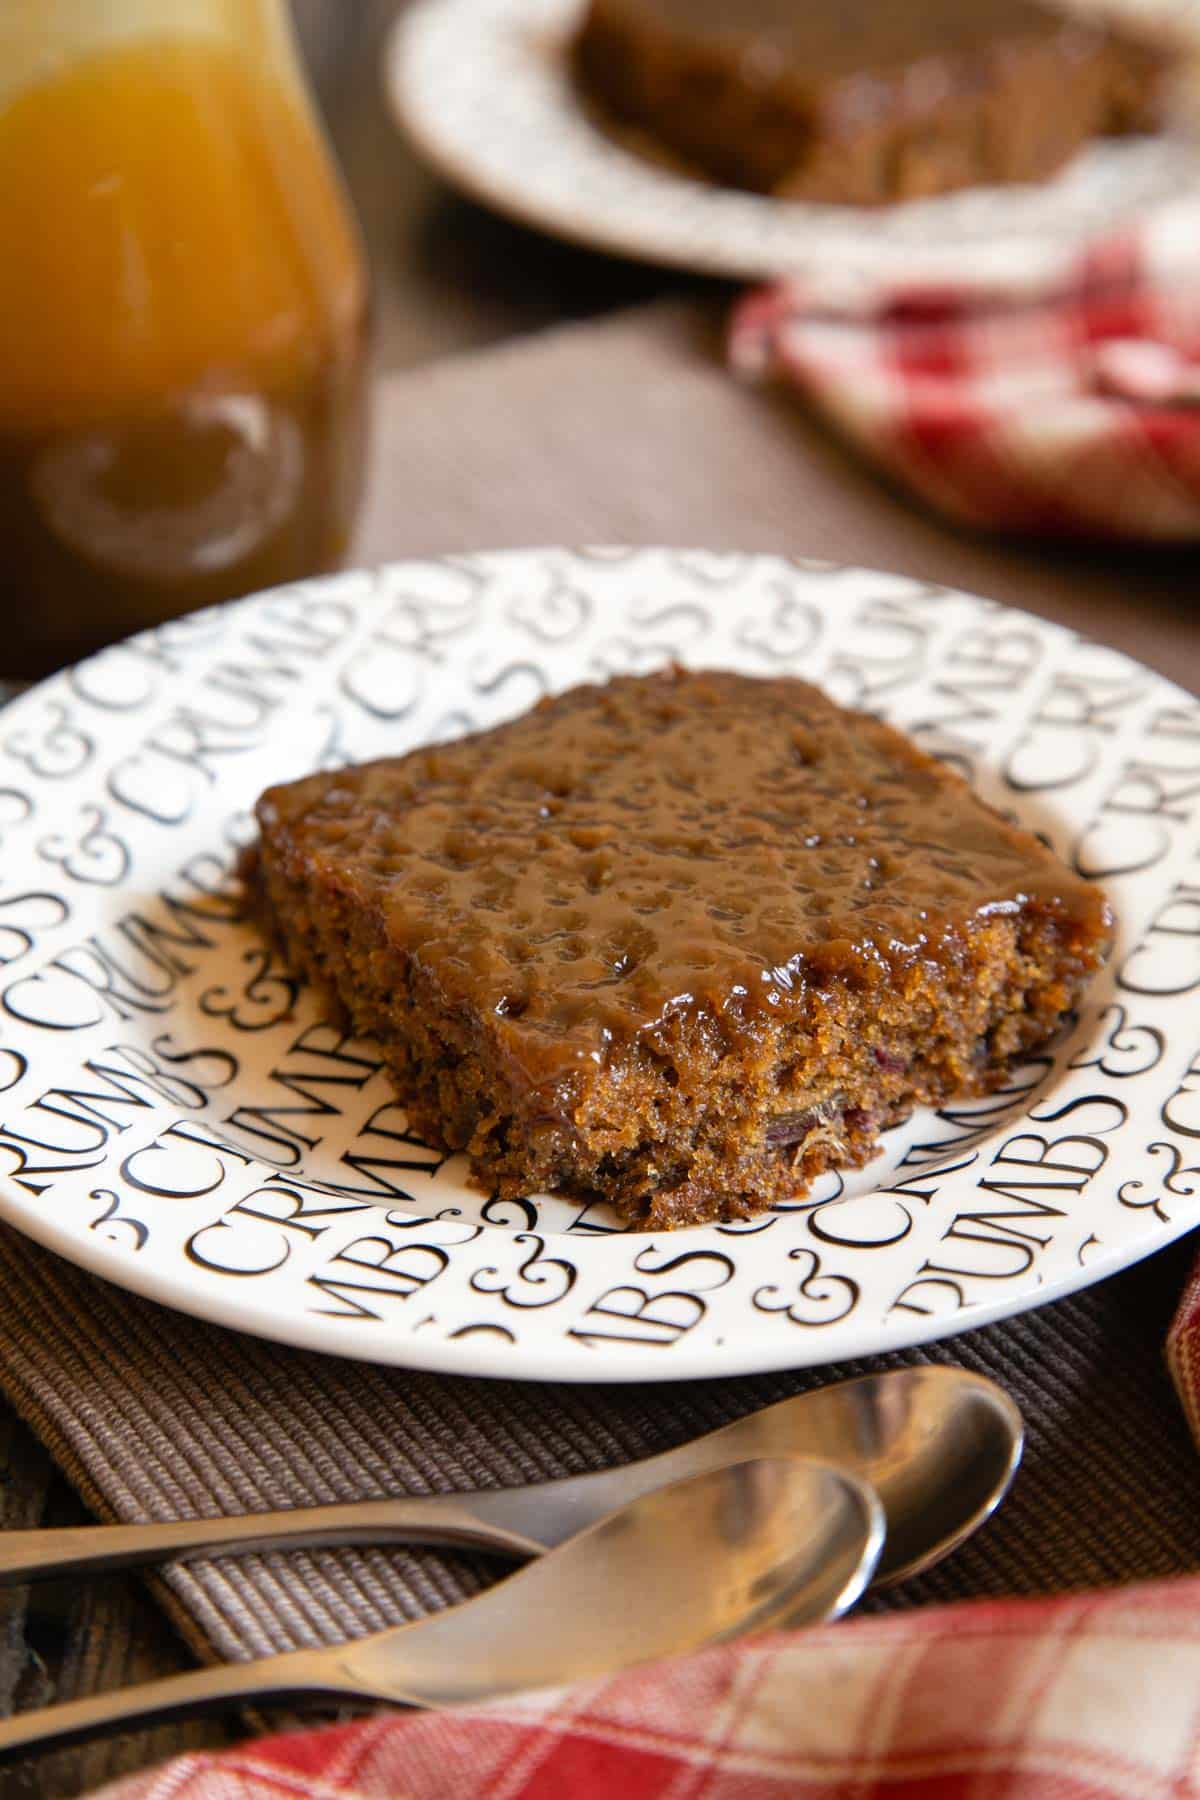 Served plain and simple - this sticky toffee pudding recipe needs no adornment